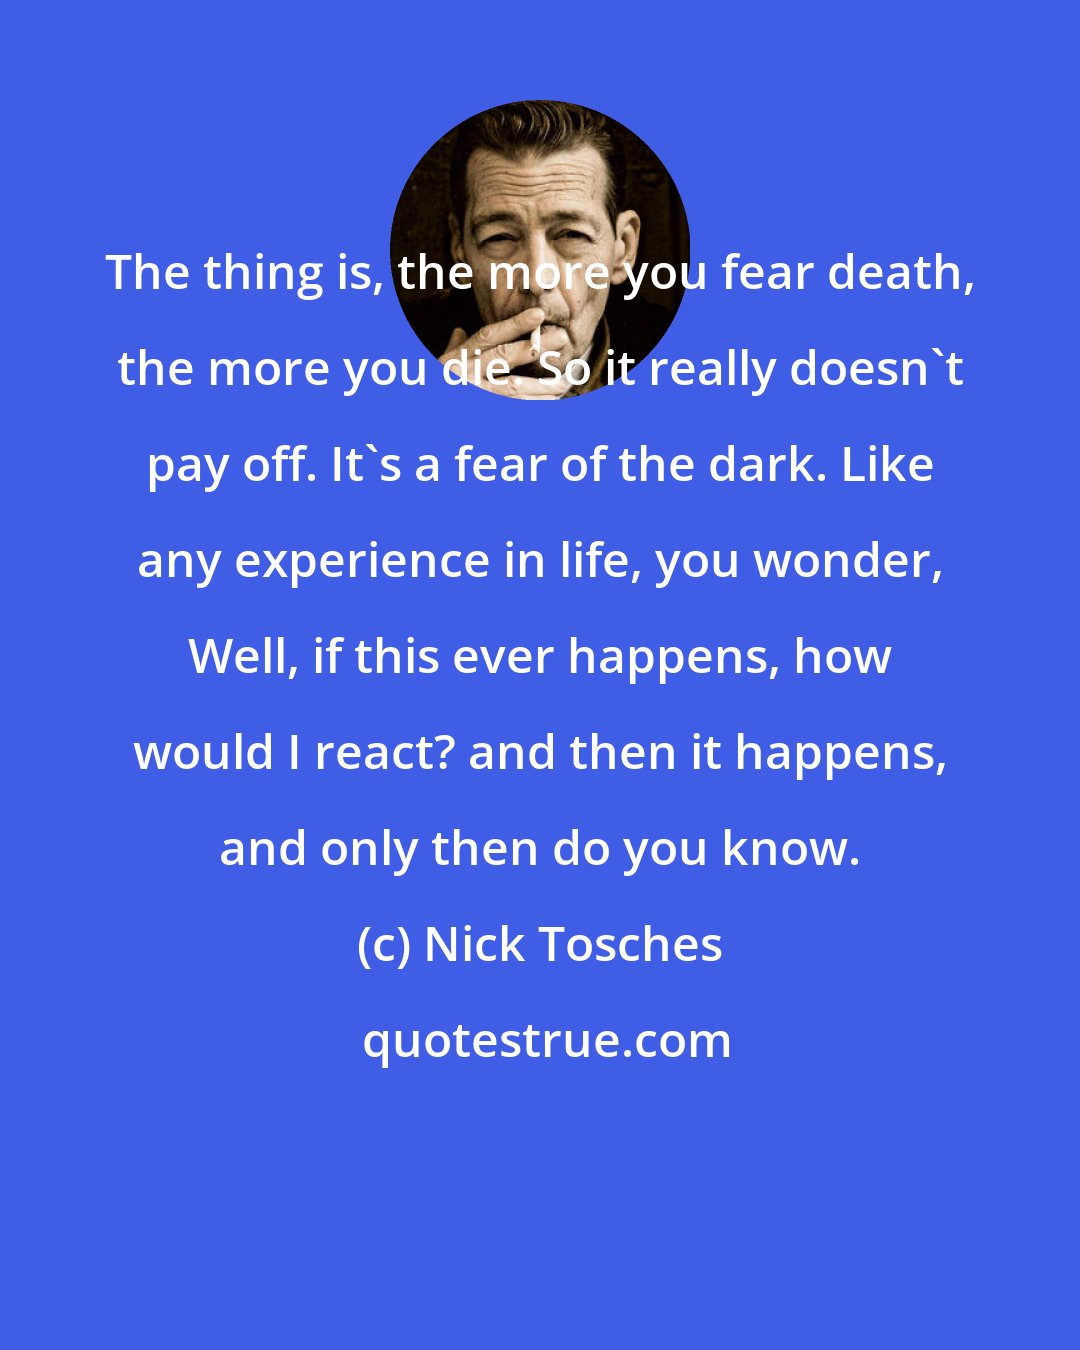 Nick Tosches: The thing is, the more you fear death, the more you die. So it really doesn't pay off. It's a fear of the dark. Like any experience in life, you wonder, Well, if this ever happens, how would I react? and then it happens, and only then do you know.